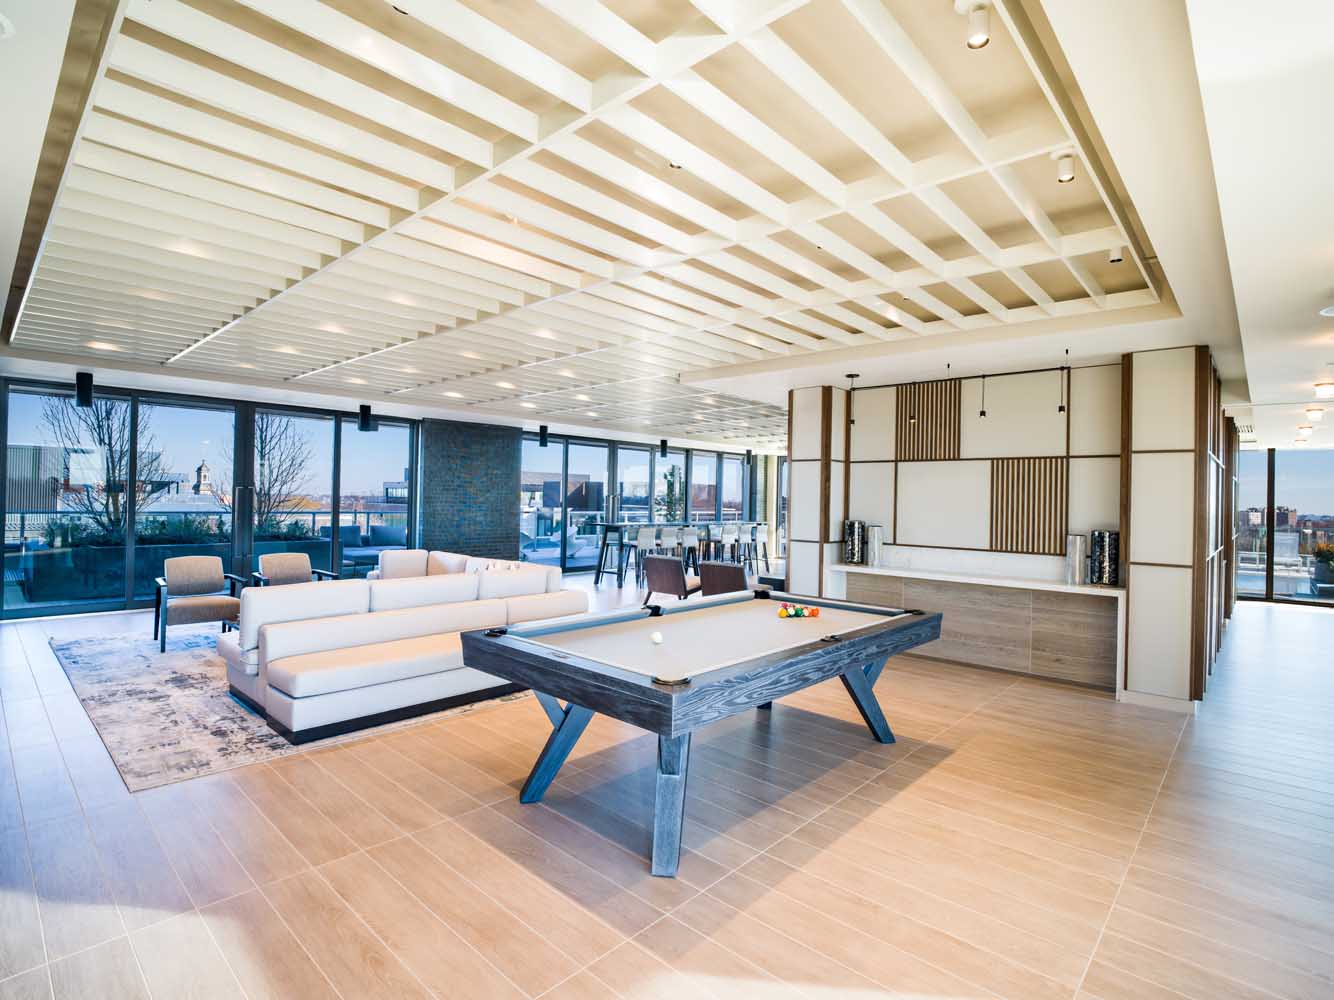 Entertain a game of pool in the rooftop lounge